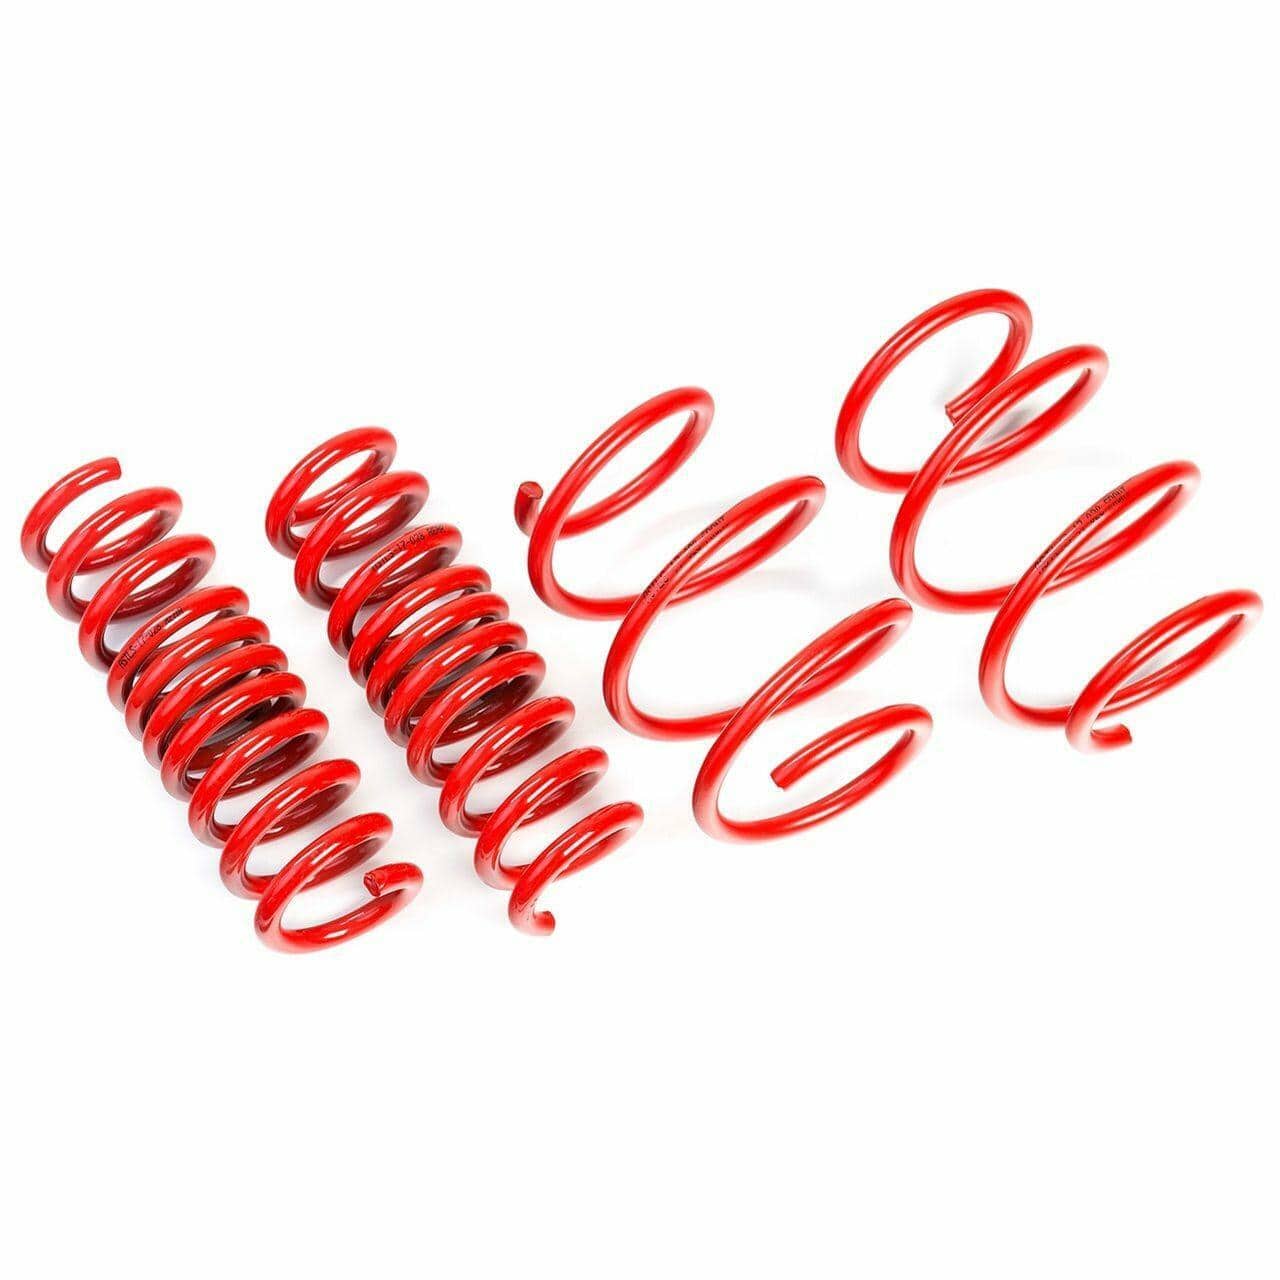 AST Suspension Lowering Springs (35MM/35MM) - 1991-1994 Mercedes-Benz S-Class 400SE/500SE/500SEL/S350D Turbo/S420/S500 (W140) ASTLS-14-1200